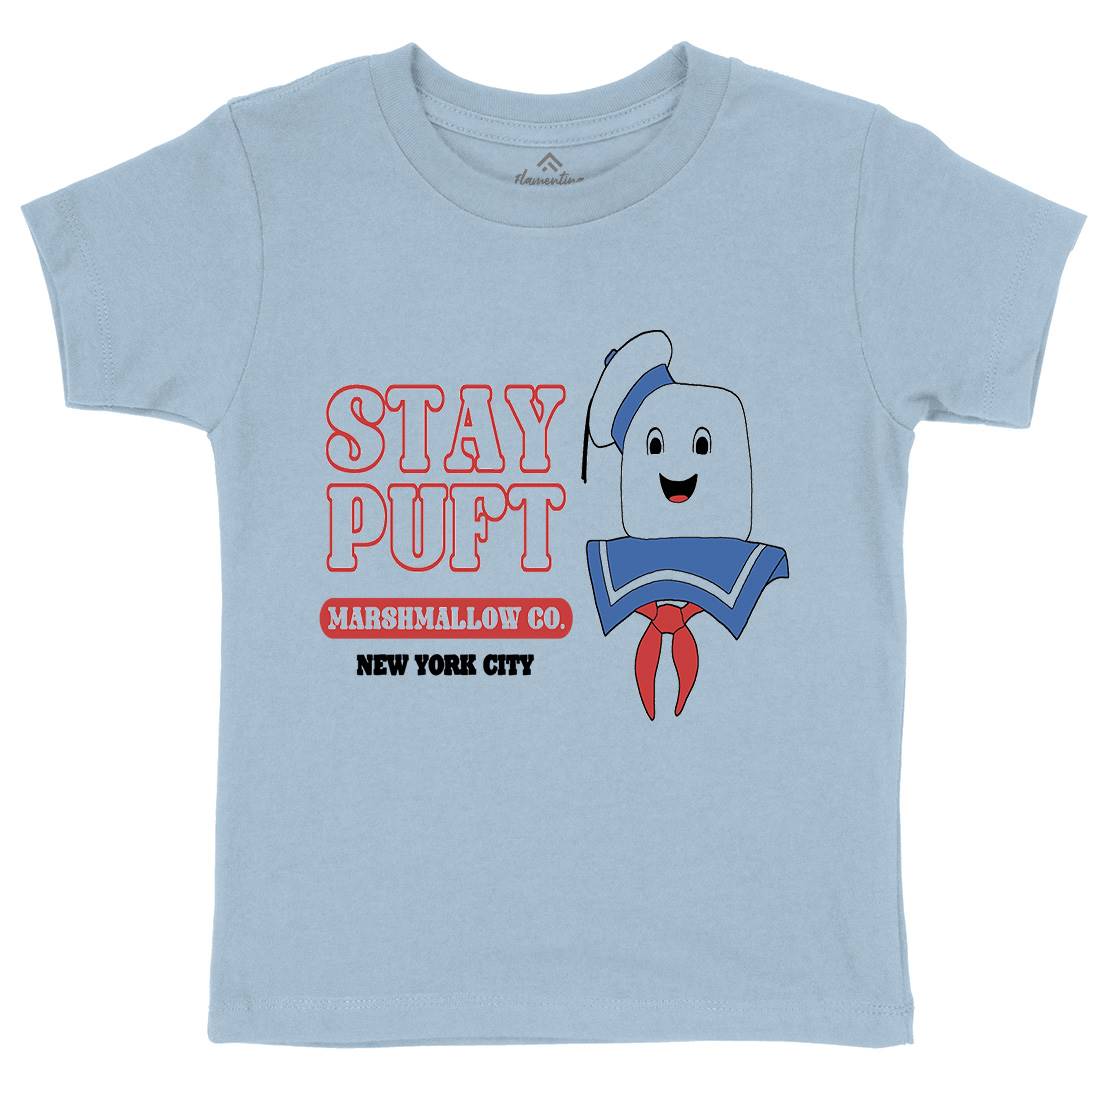 Stay Puft Co Kids Organic Crew Neck T-Shirt Space D141